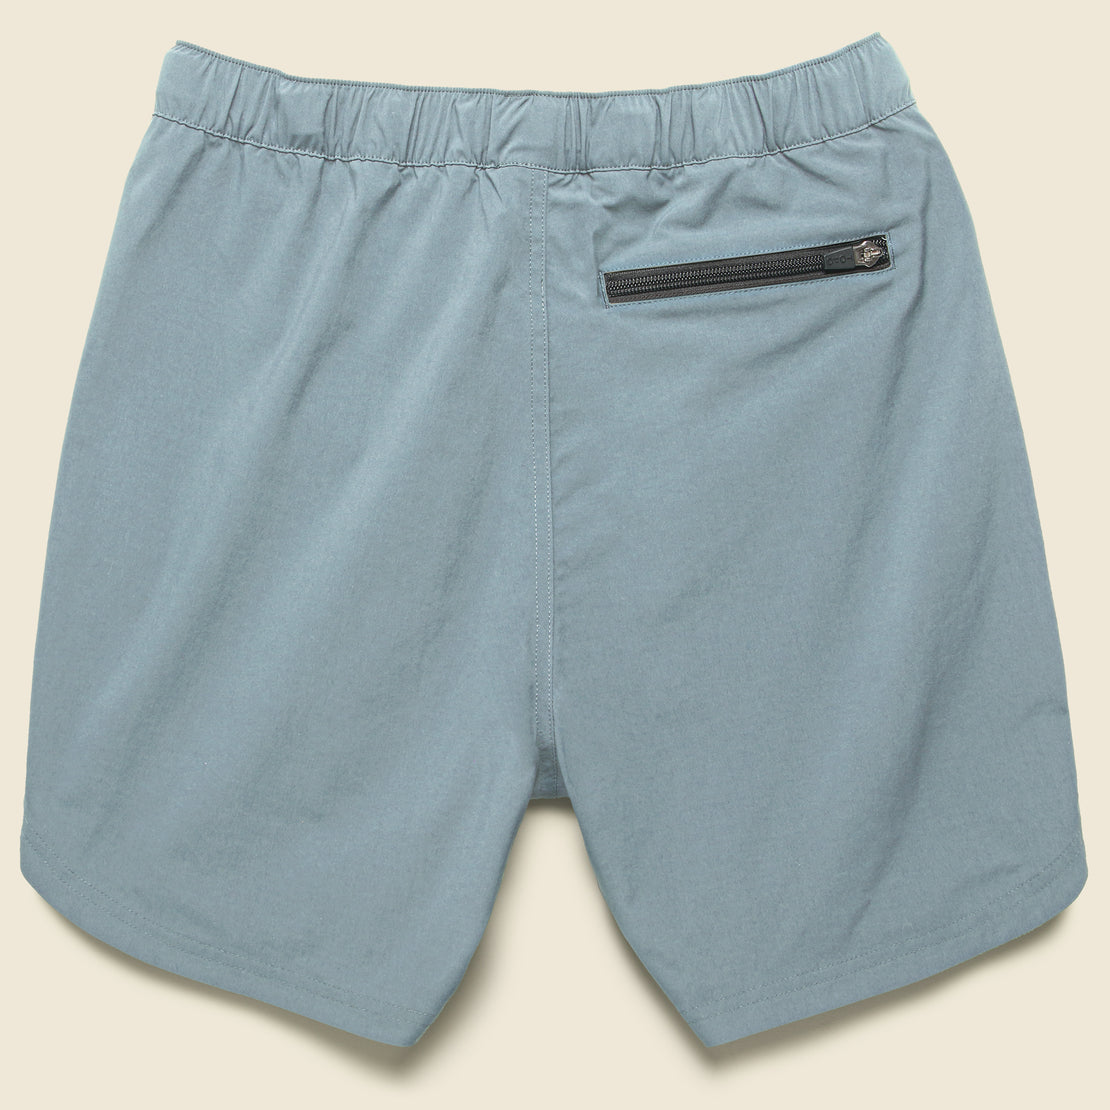 River Shorts - Slate Blue - Topo Designs - STAG Provisions - Shorts - Solid